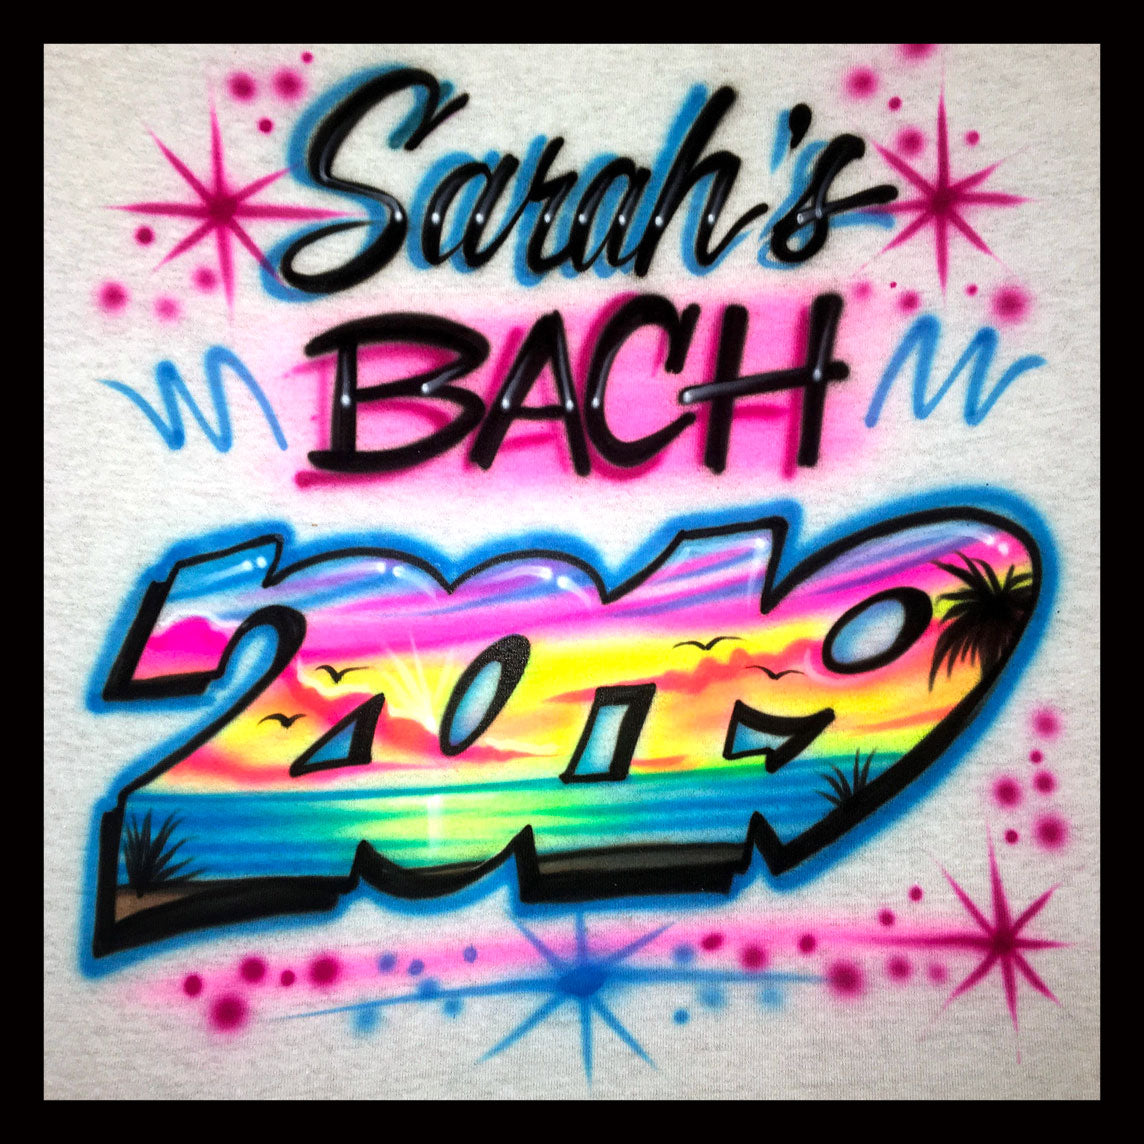 Airbrush T-shirt - Beach - Year - Custom - Personalized - Bach - Bachelorette - Your words